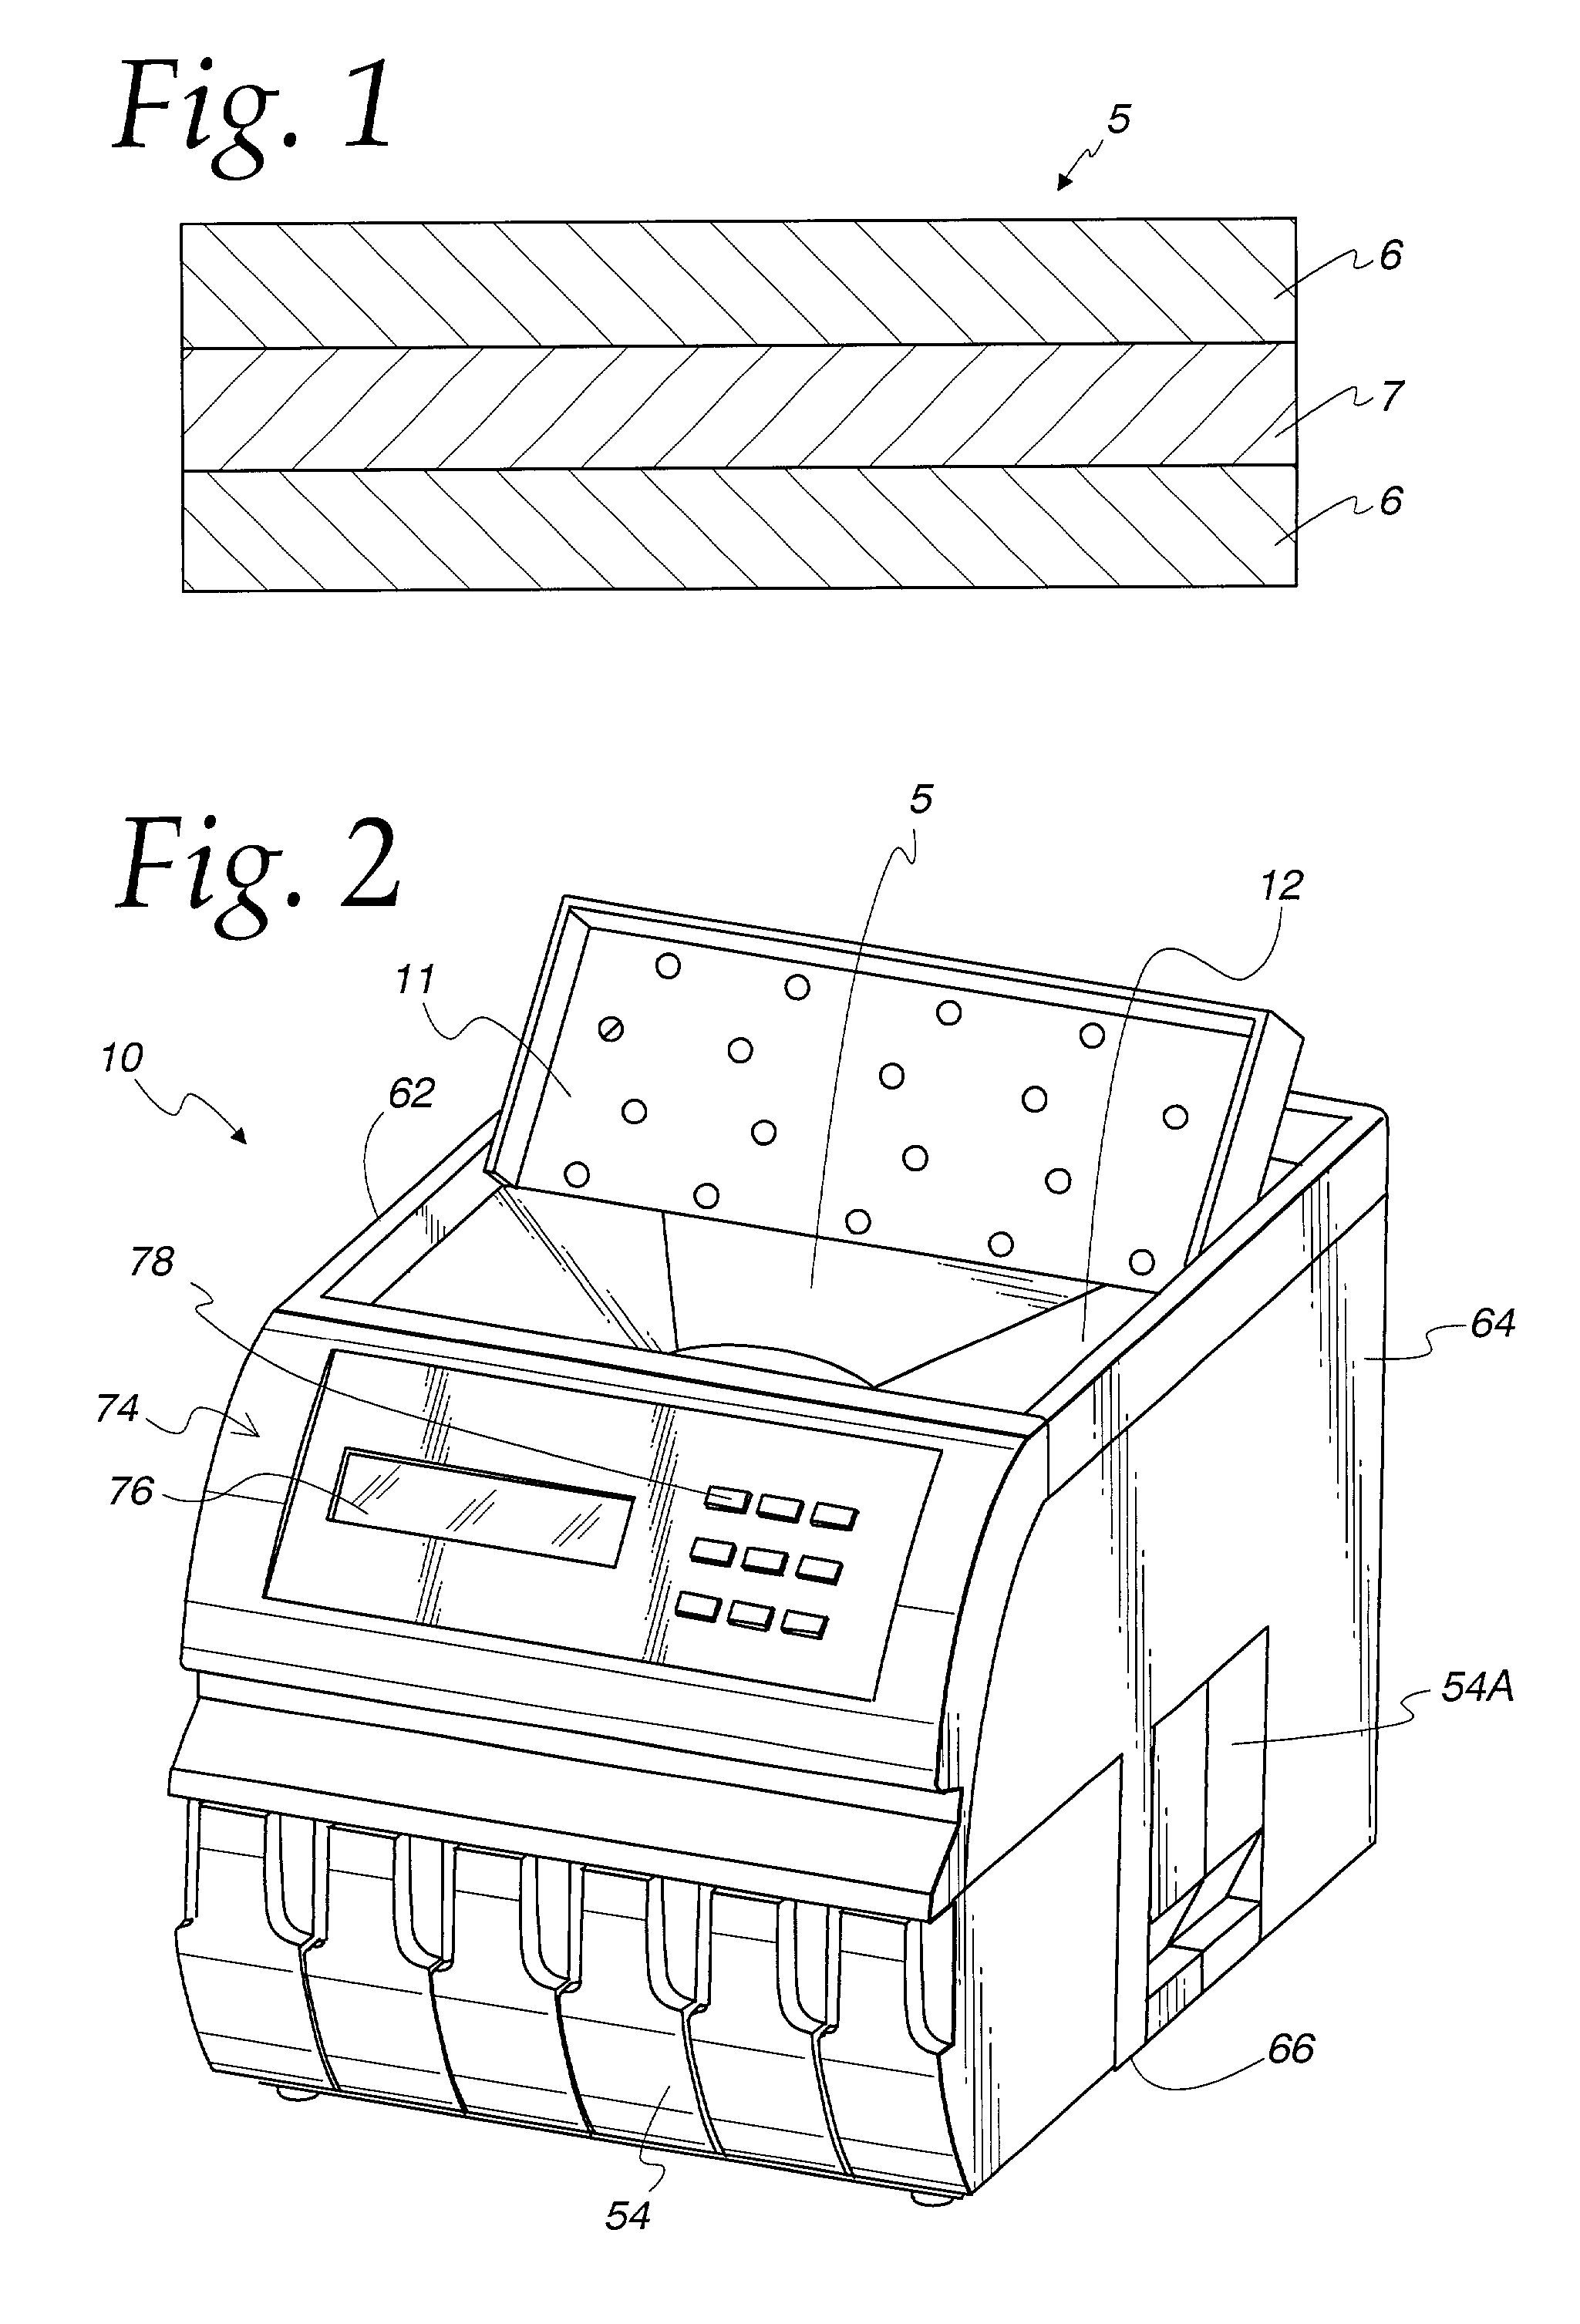 Coin processing machine having coin-impact surfaces made from laminated metal